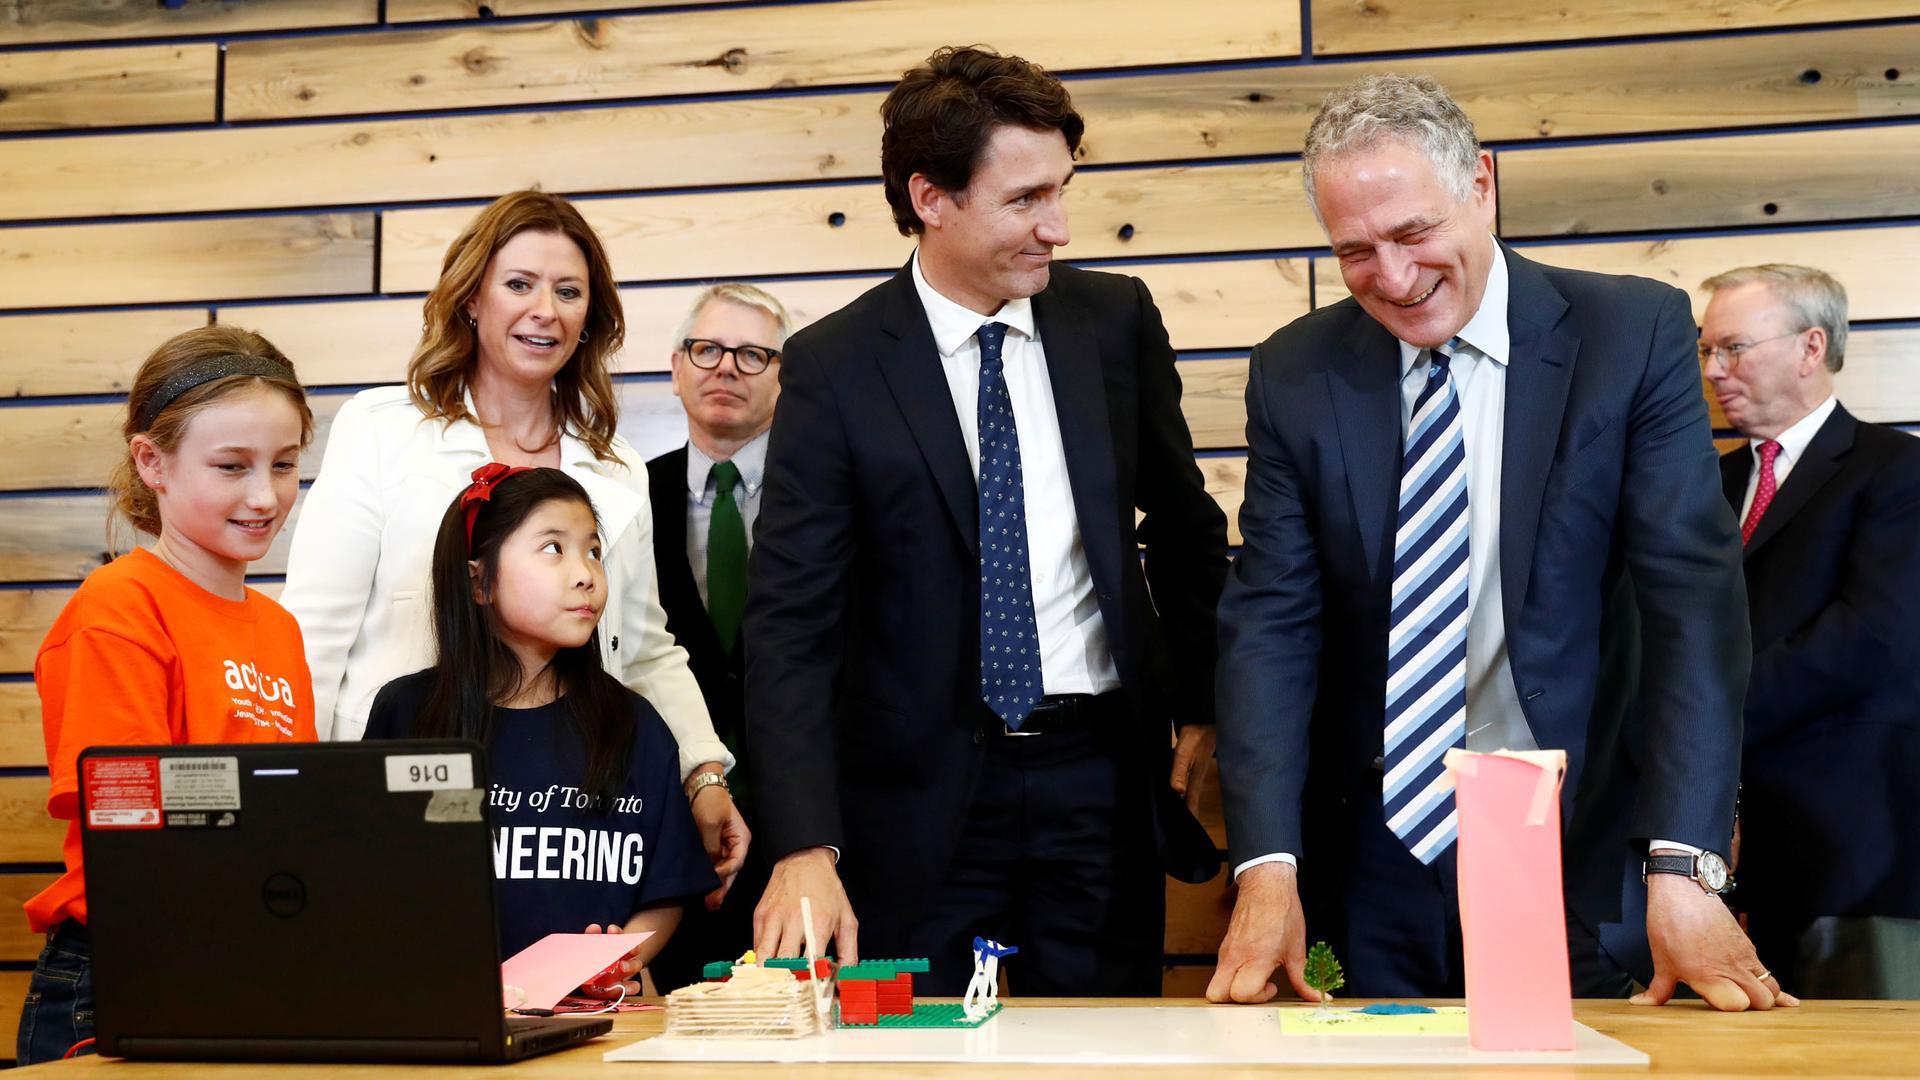 Canadian Prime Minister stands at a table surrounded by others.